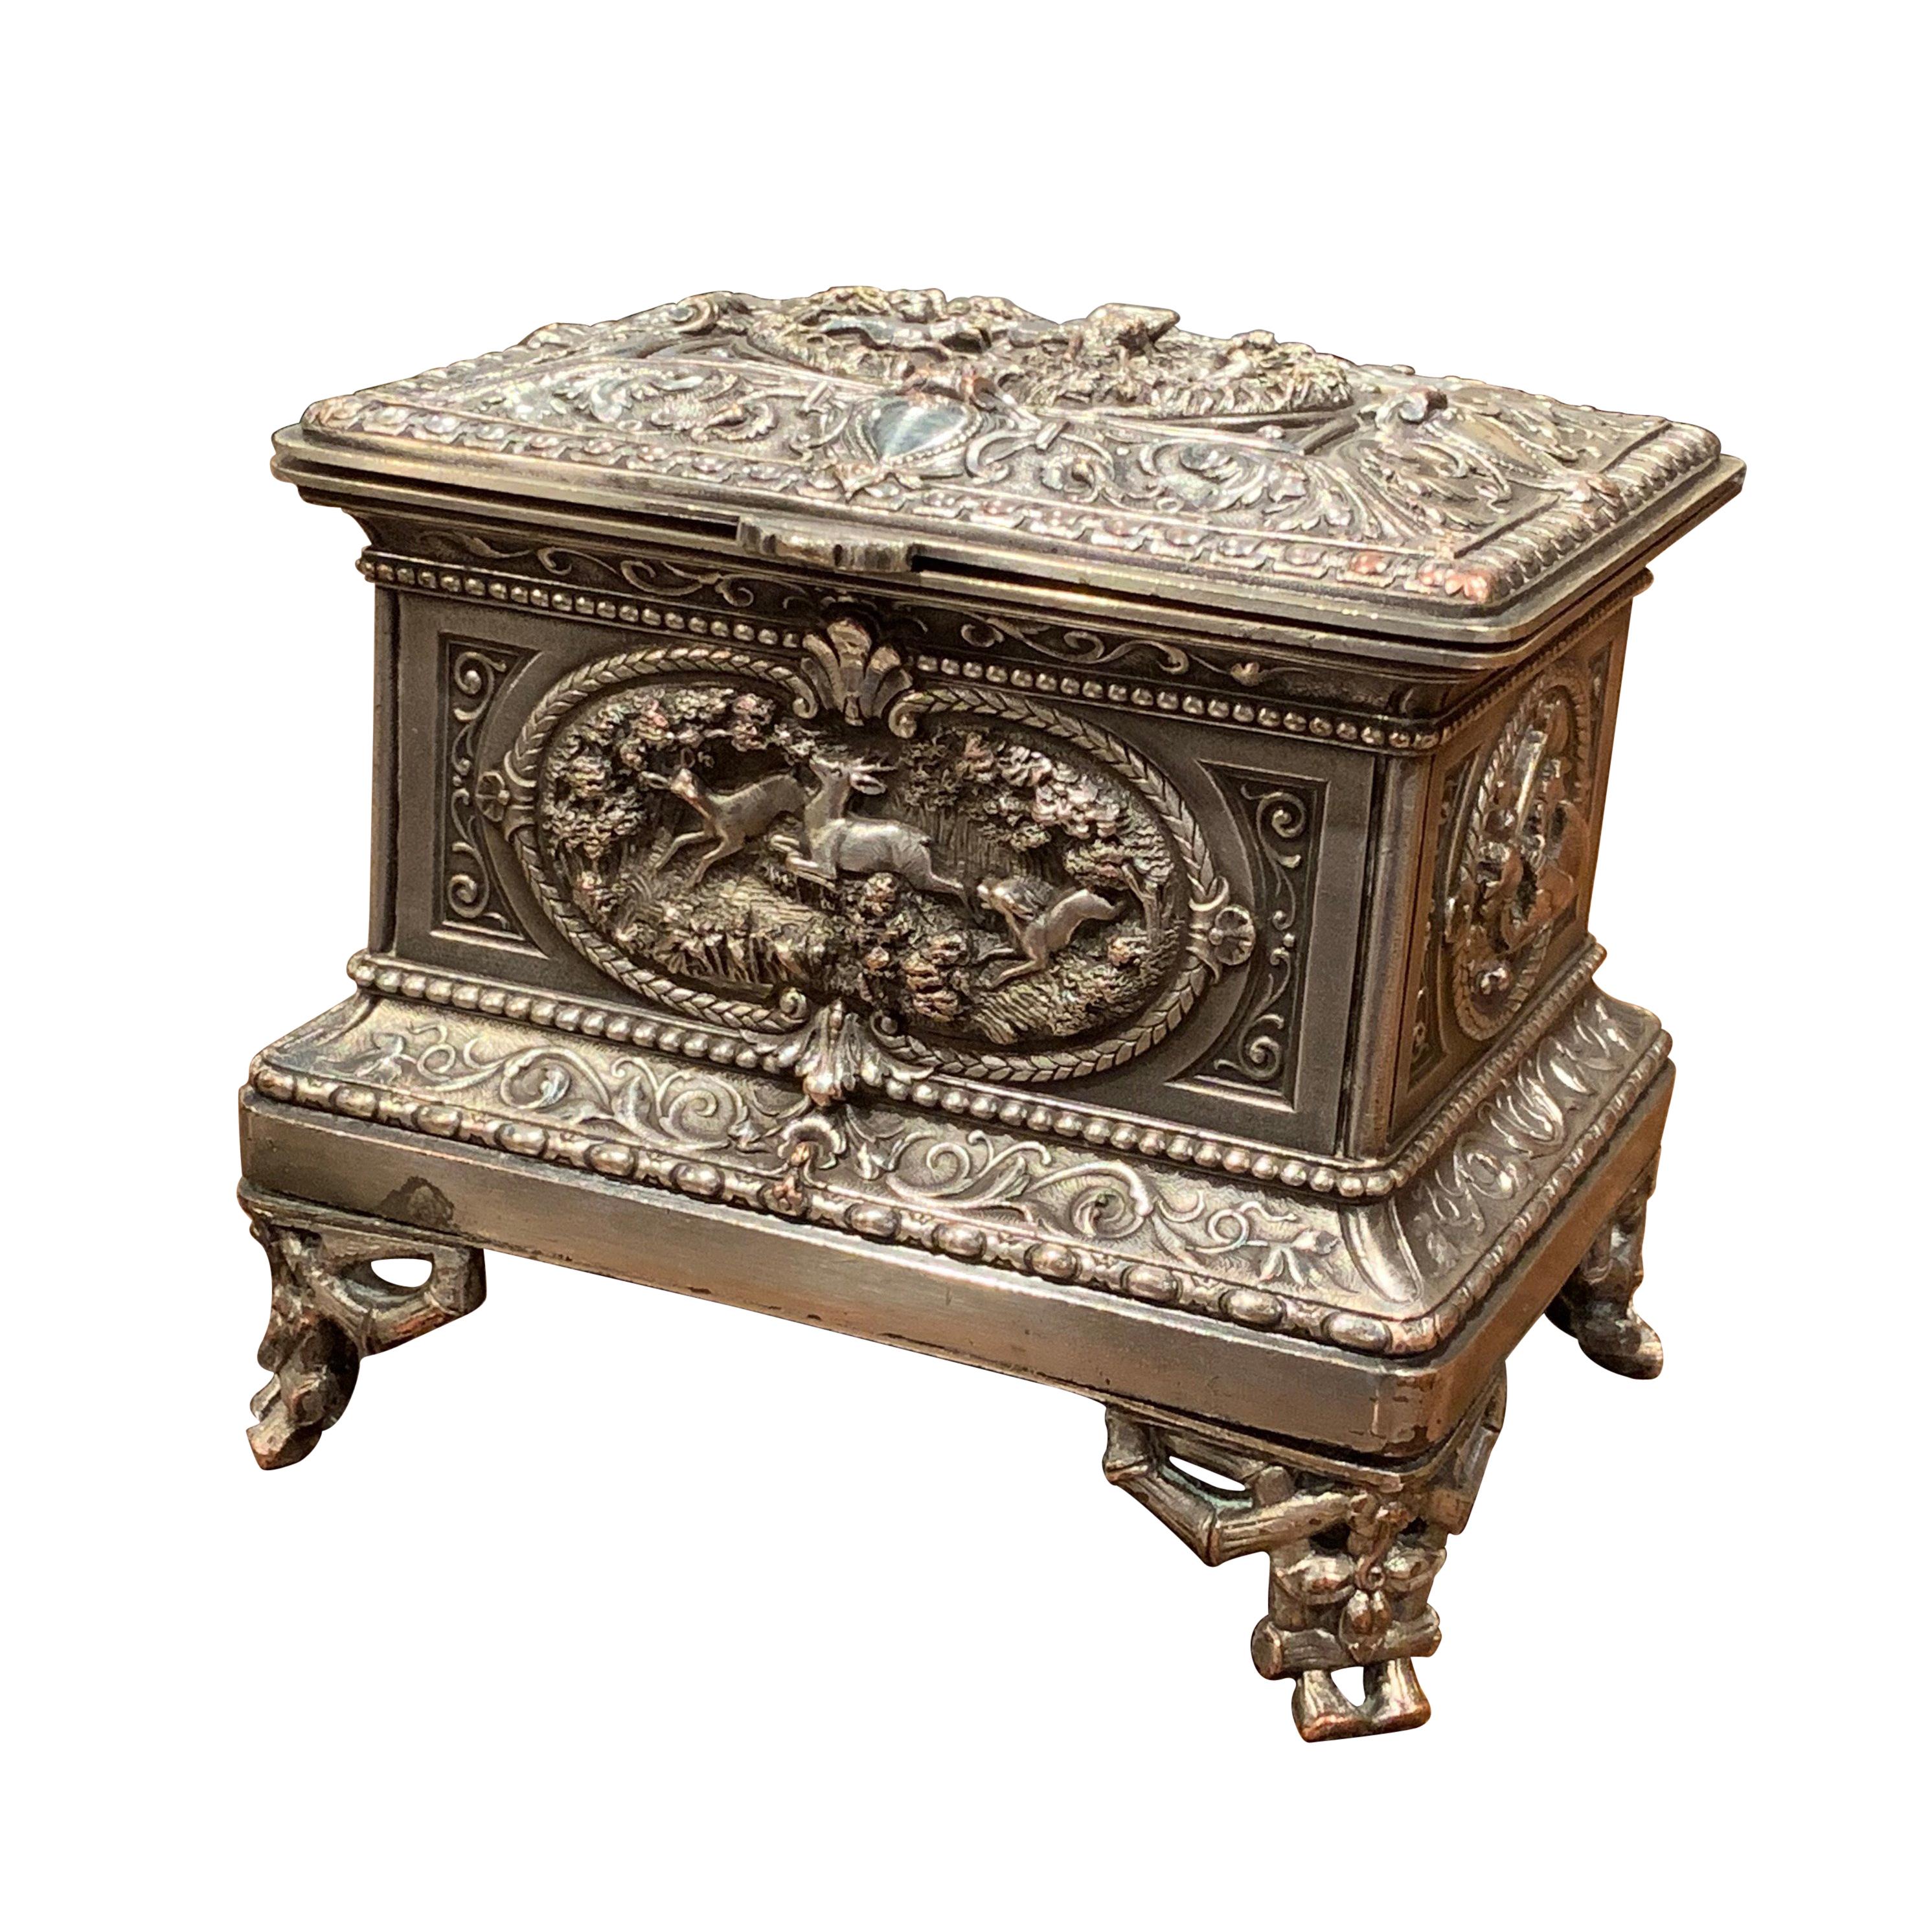 19th Century French Silver Plated on Copper Jewelry Box with Repoussé Hunt Motif